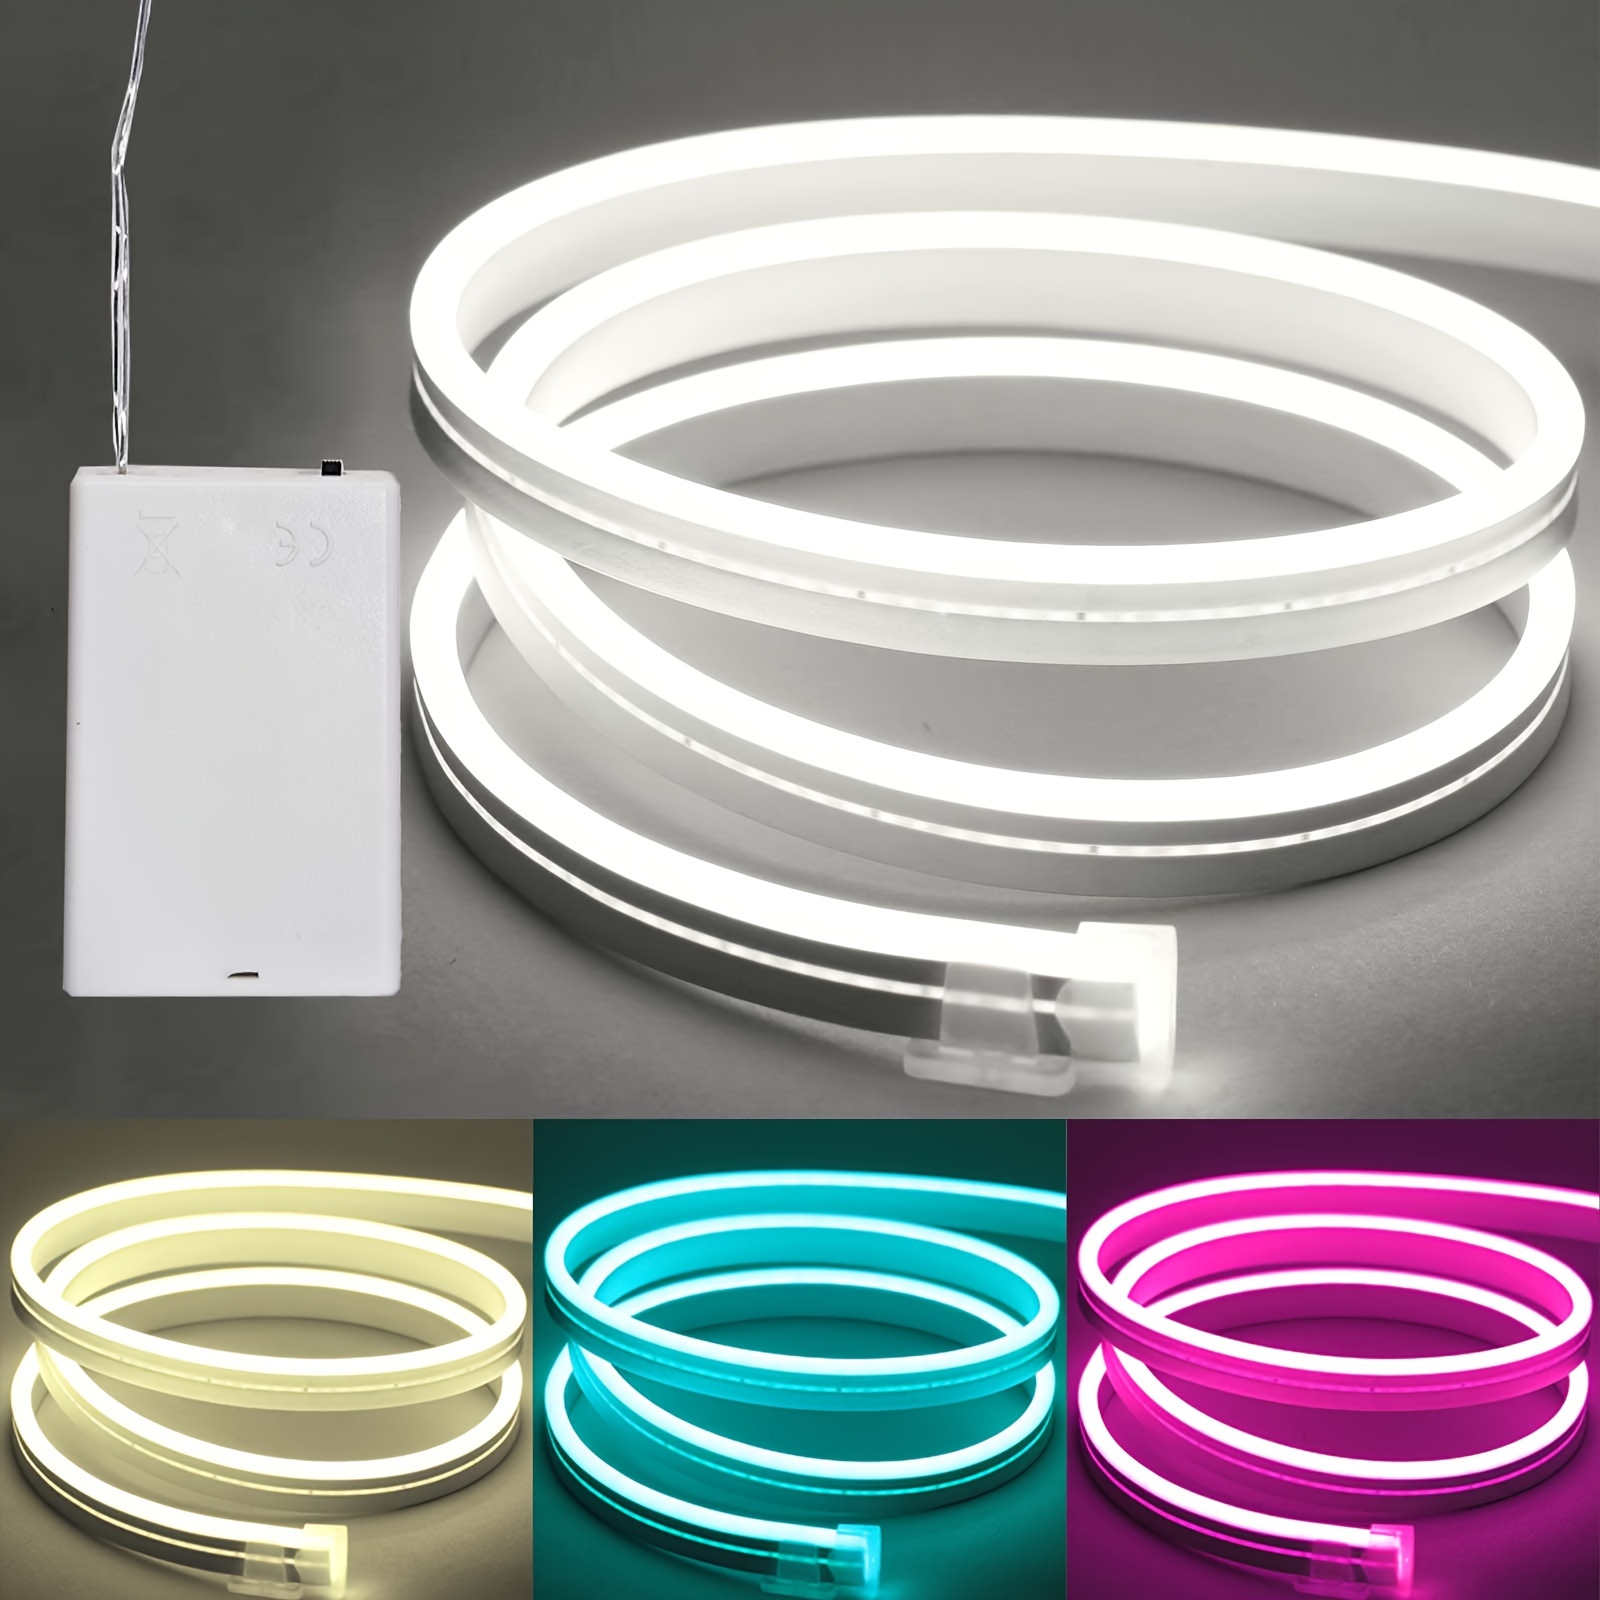 

1pc 5v Neon Led Strip Lights, 5m/16.4ft, Battery Box Powered (batteries Not Included), Suitable For Use In Mirrors, Ceilings, Kitchens, Rooms, Cabinets, Wardrobes And Other Scene Decorative Lighting